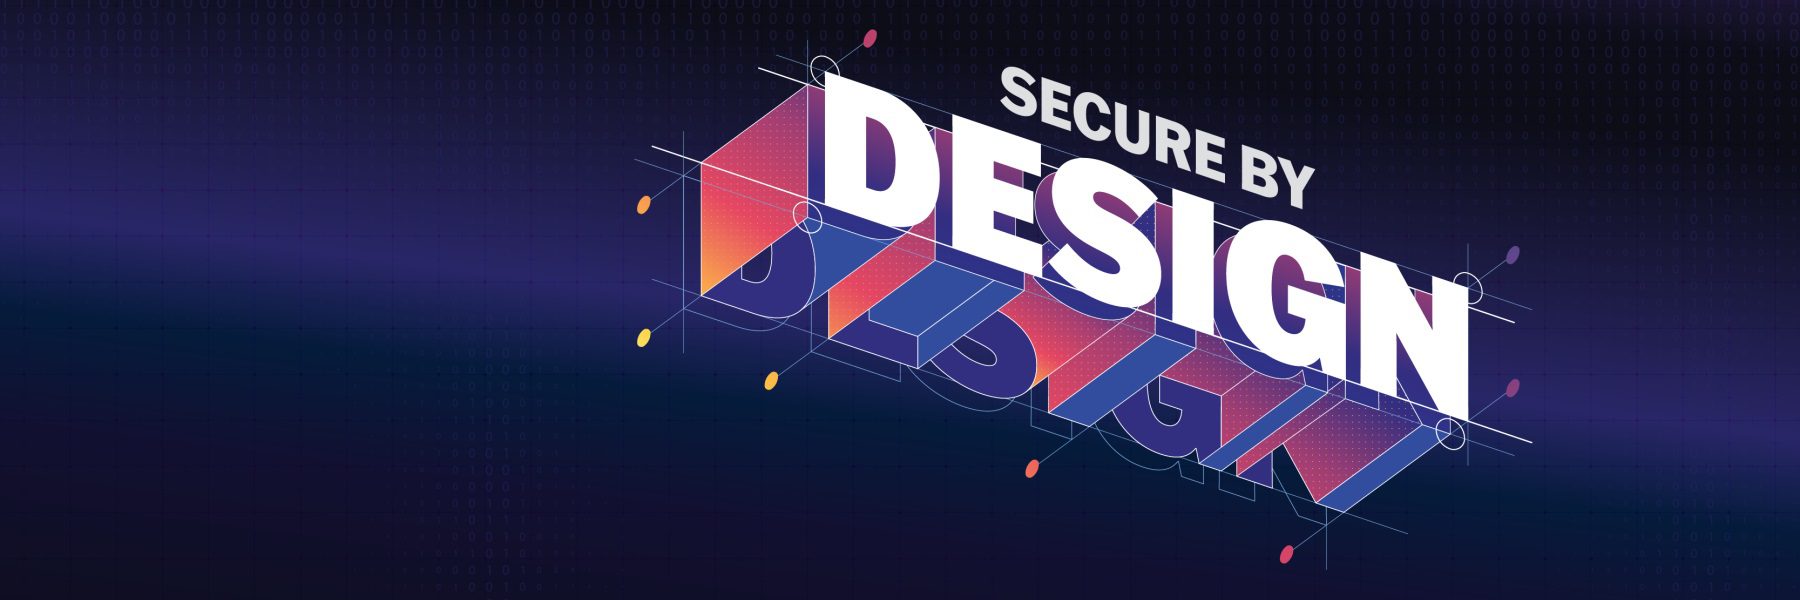 CISA’s Secure by Design | Fortifying Cybersecurity Paradigms